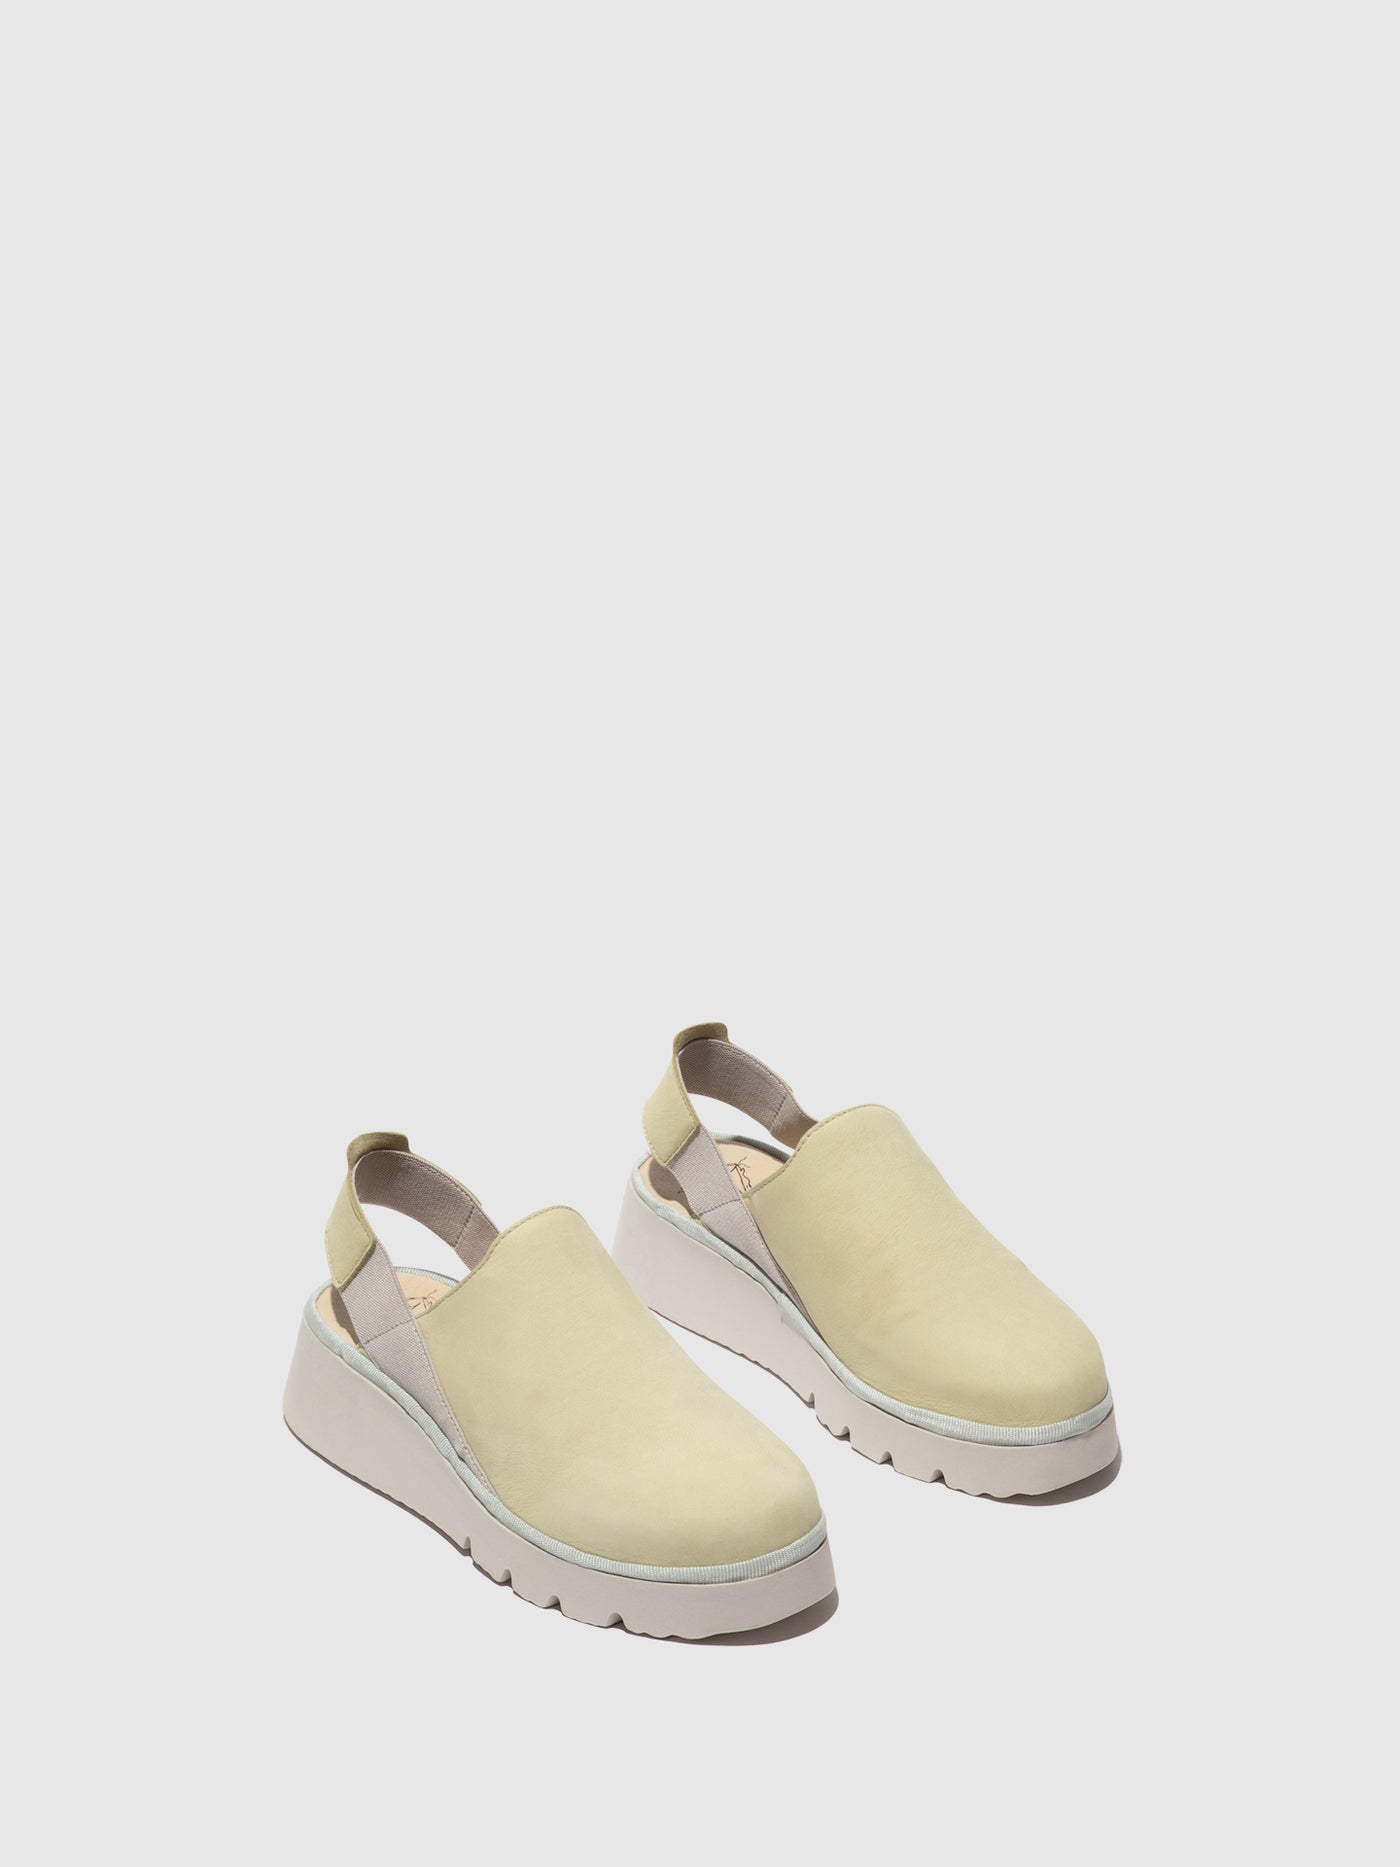 Sling-Back Shoes PLOG430FLY PALE YELLOW